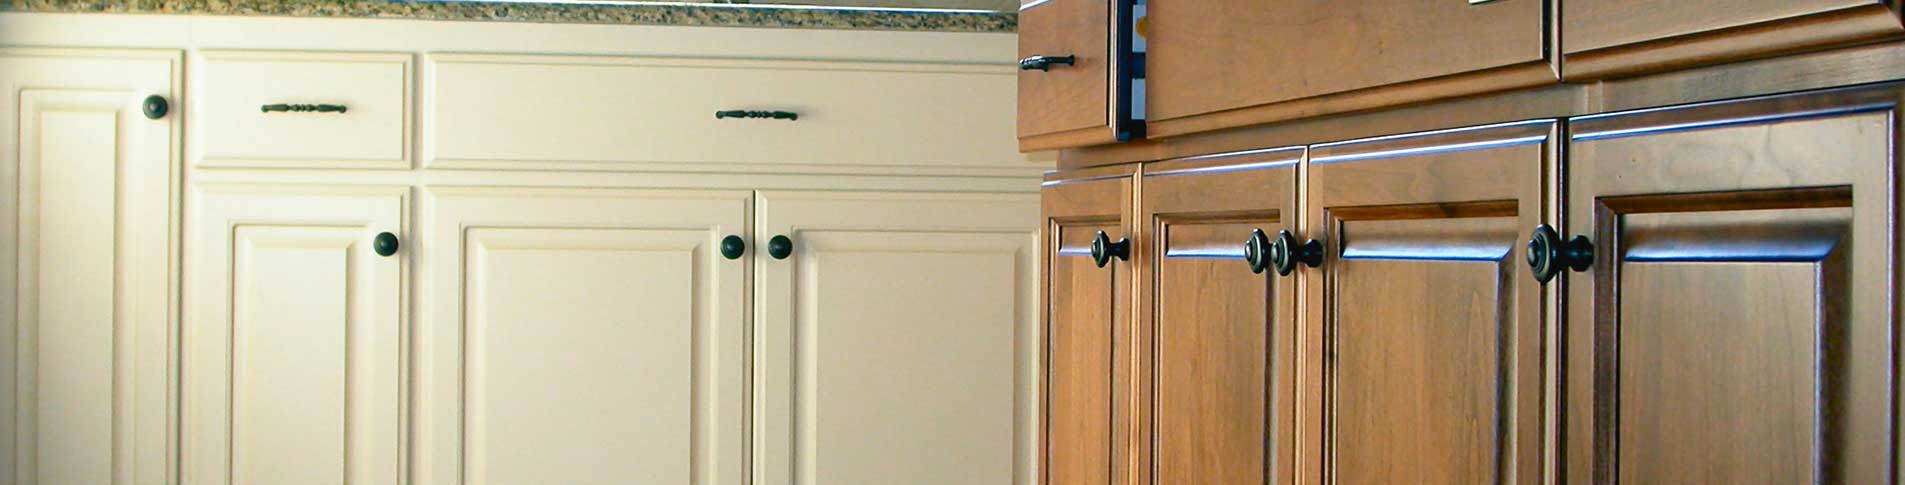 Paint and Stained Kitchen Cabinets